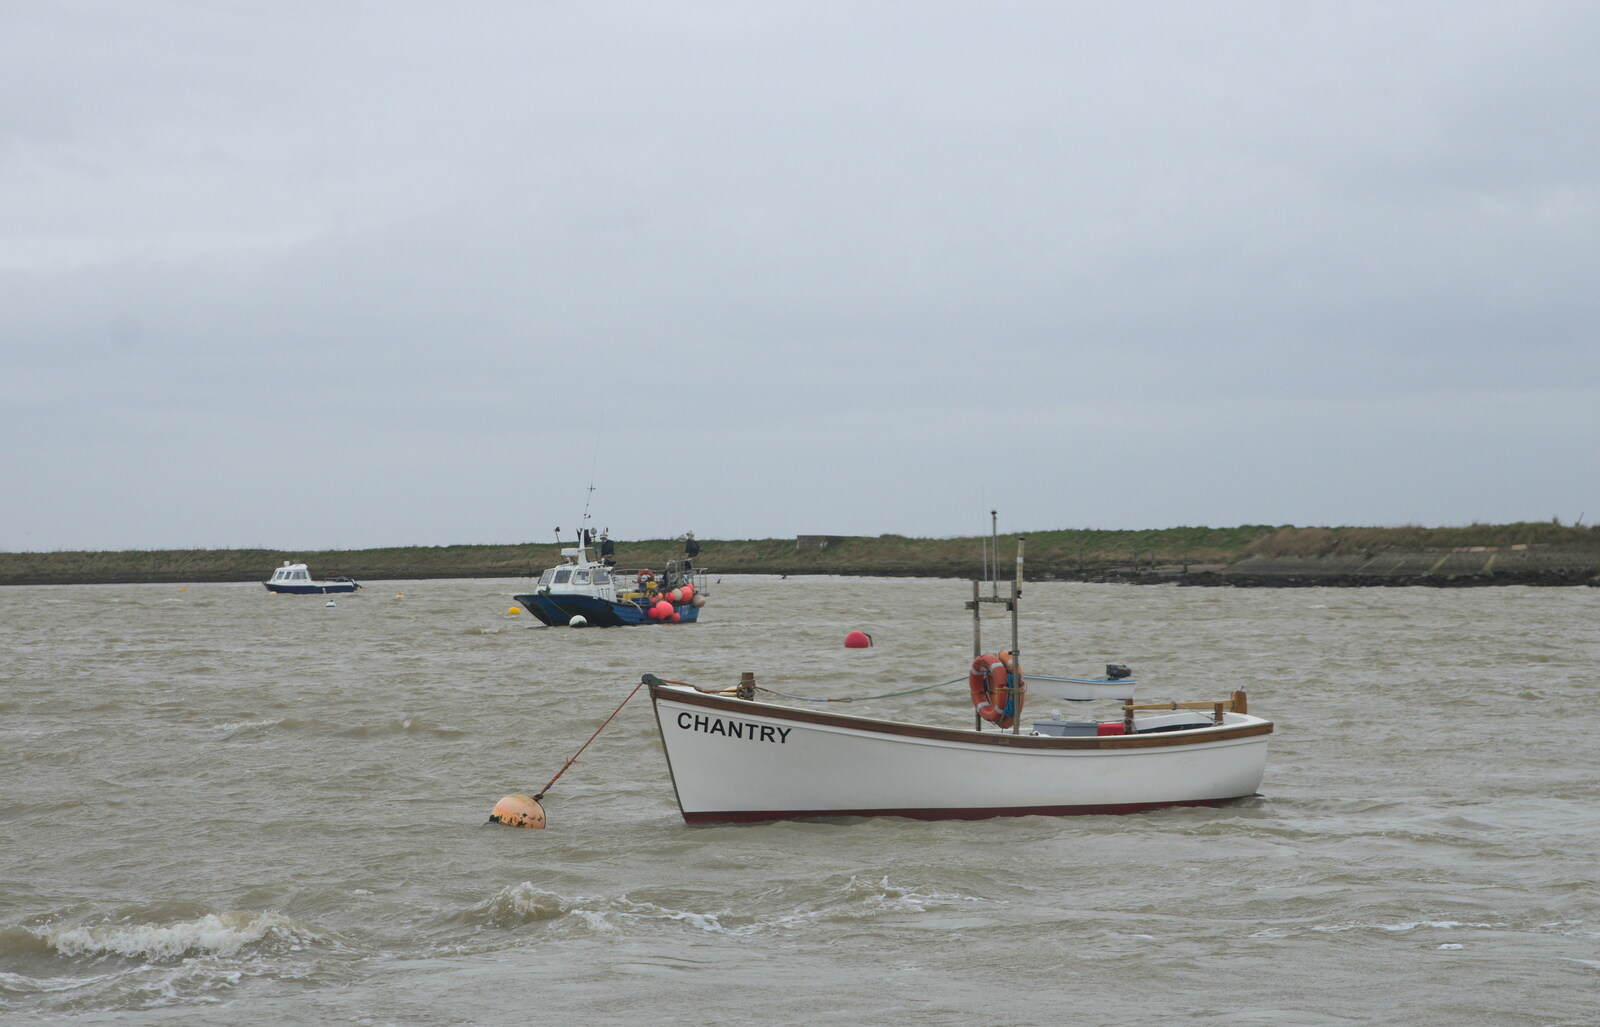 The fishing boat Chantry on the choppy river from A Trip to Orford Castle, Orford, Suffolk - 2nd March 2014